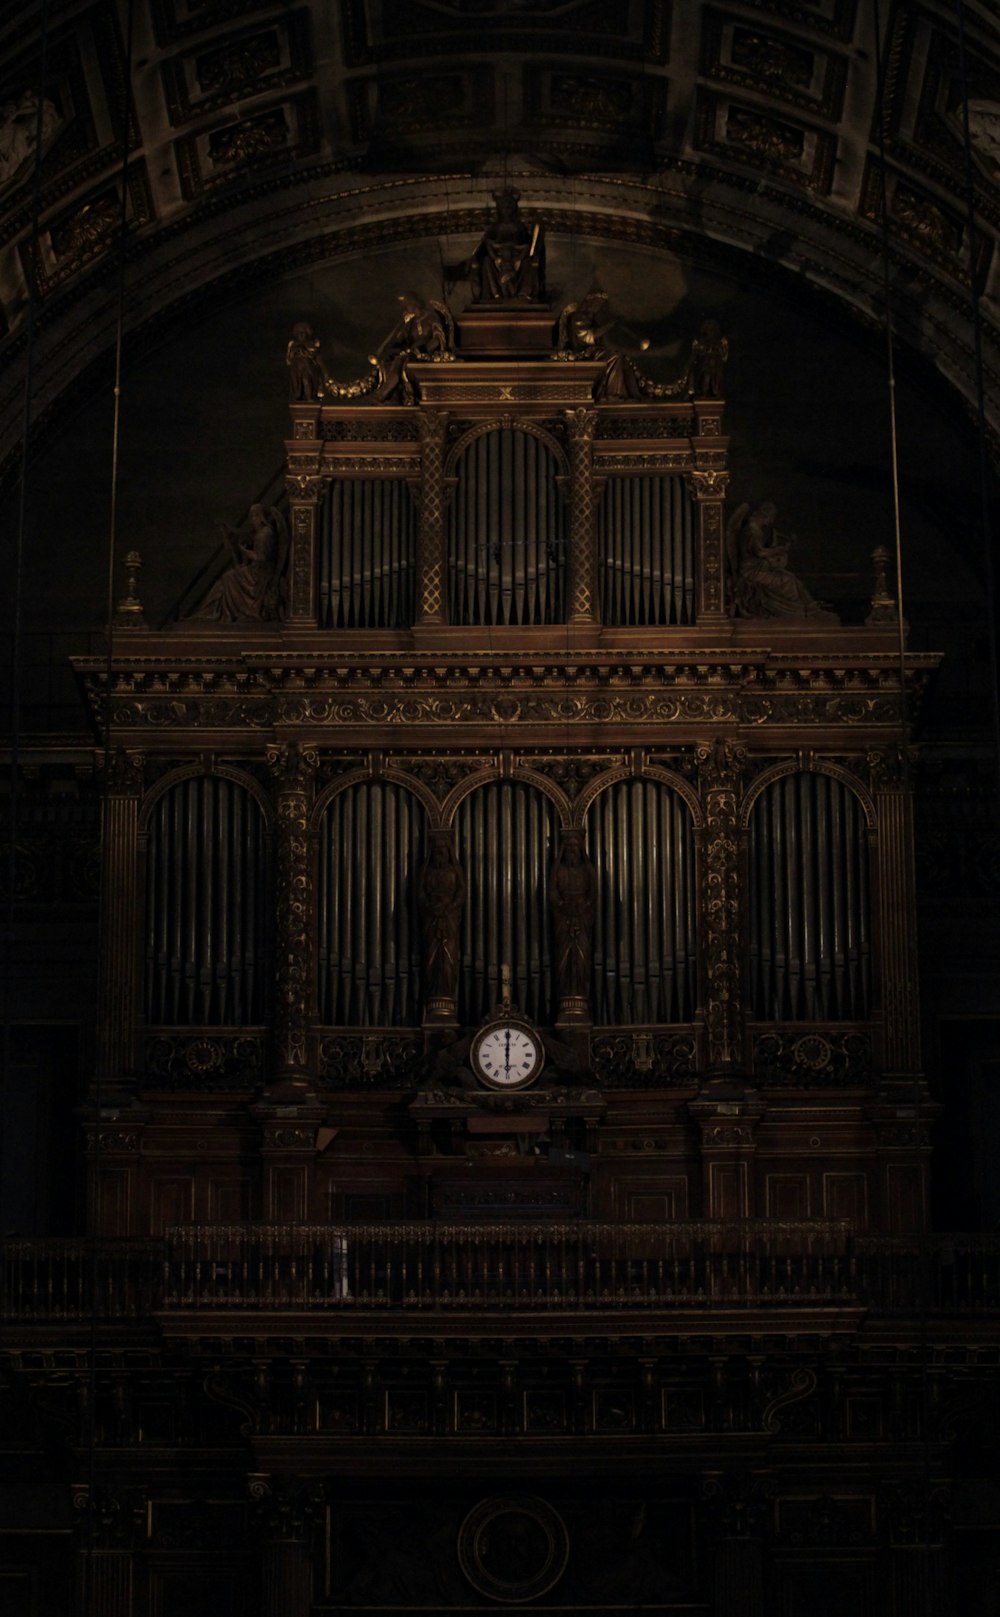 a large pipe organ in a dark room